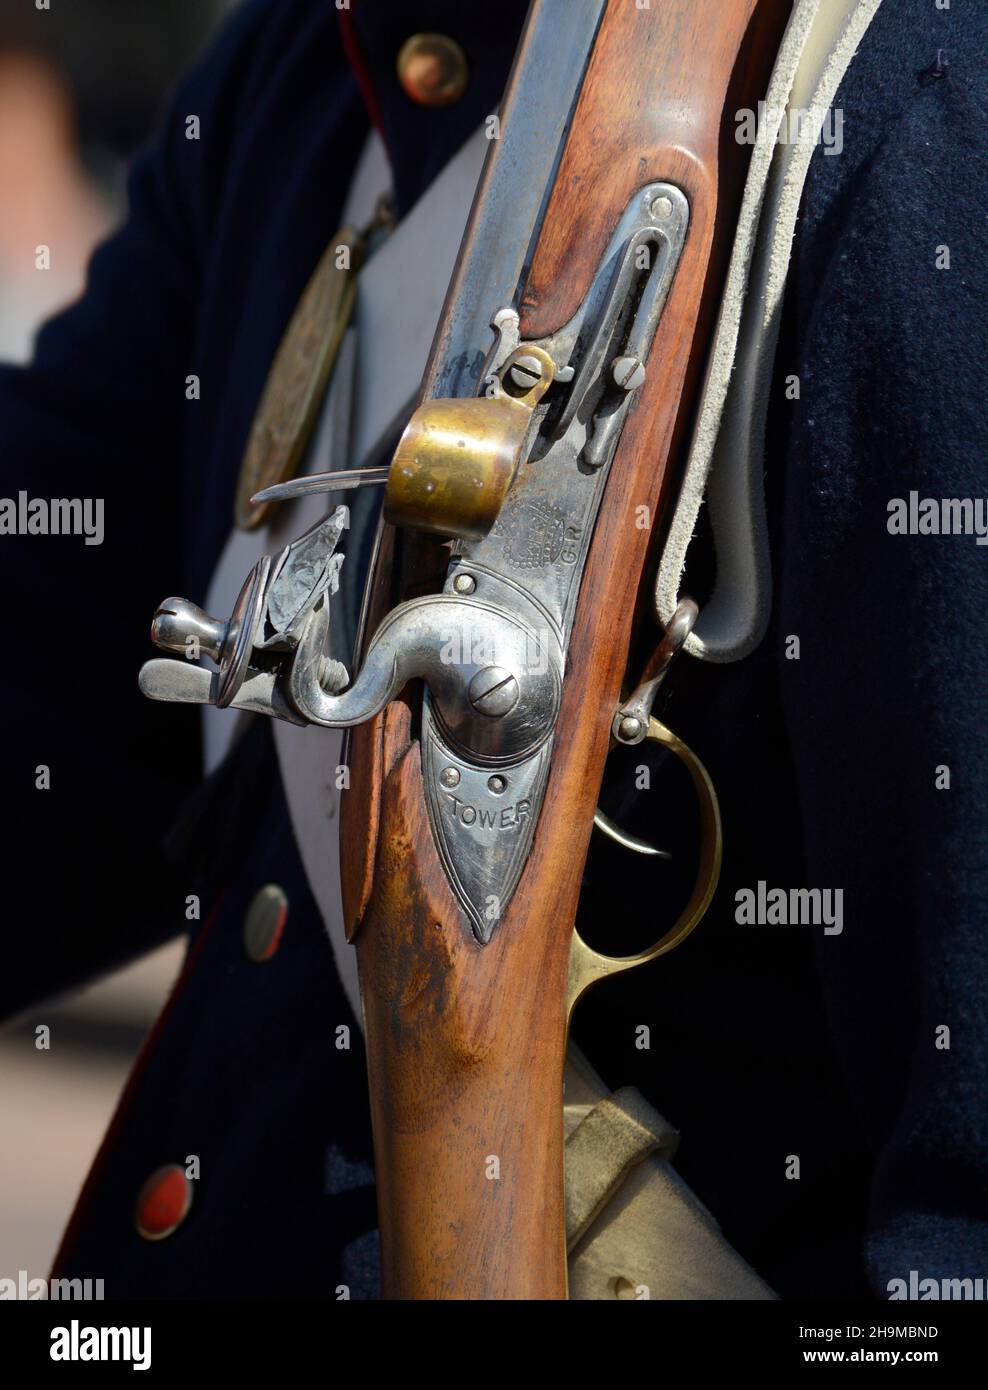 An historical reenactor holds a replica 19th century flintlock musket, or rifle, at an event in Santa Fe, New Mexico. Stock Photo